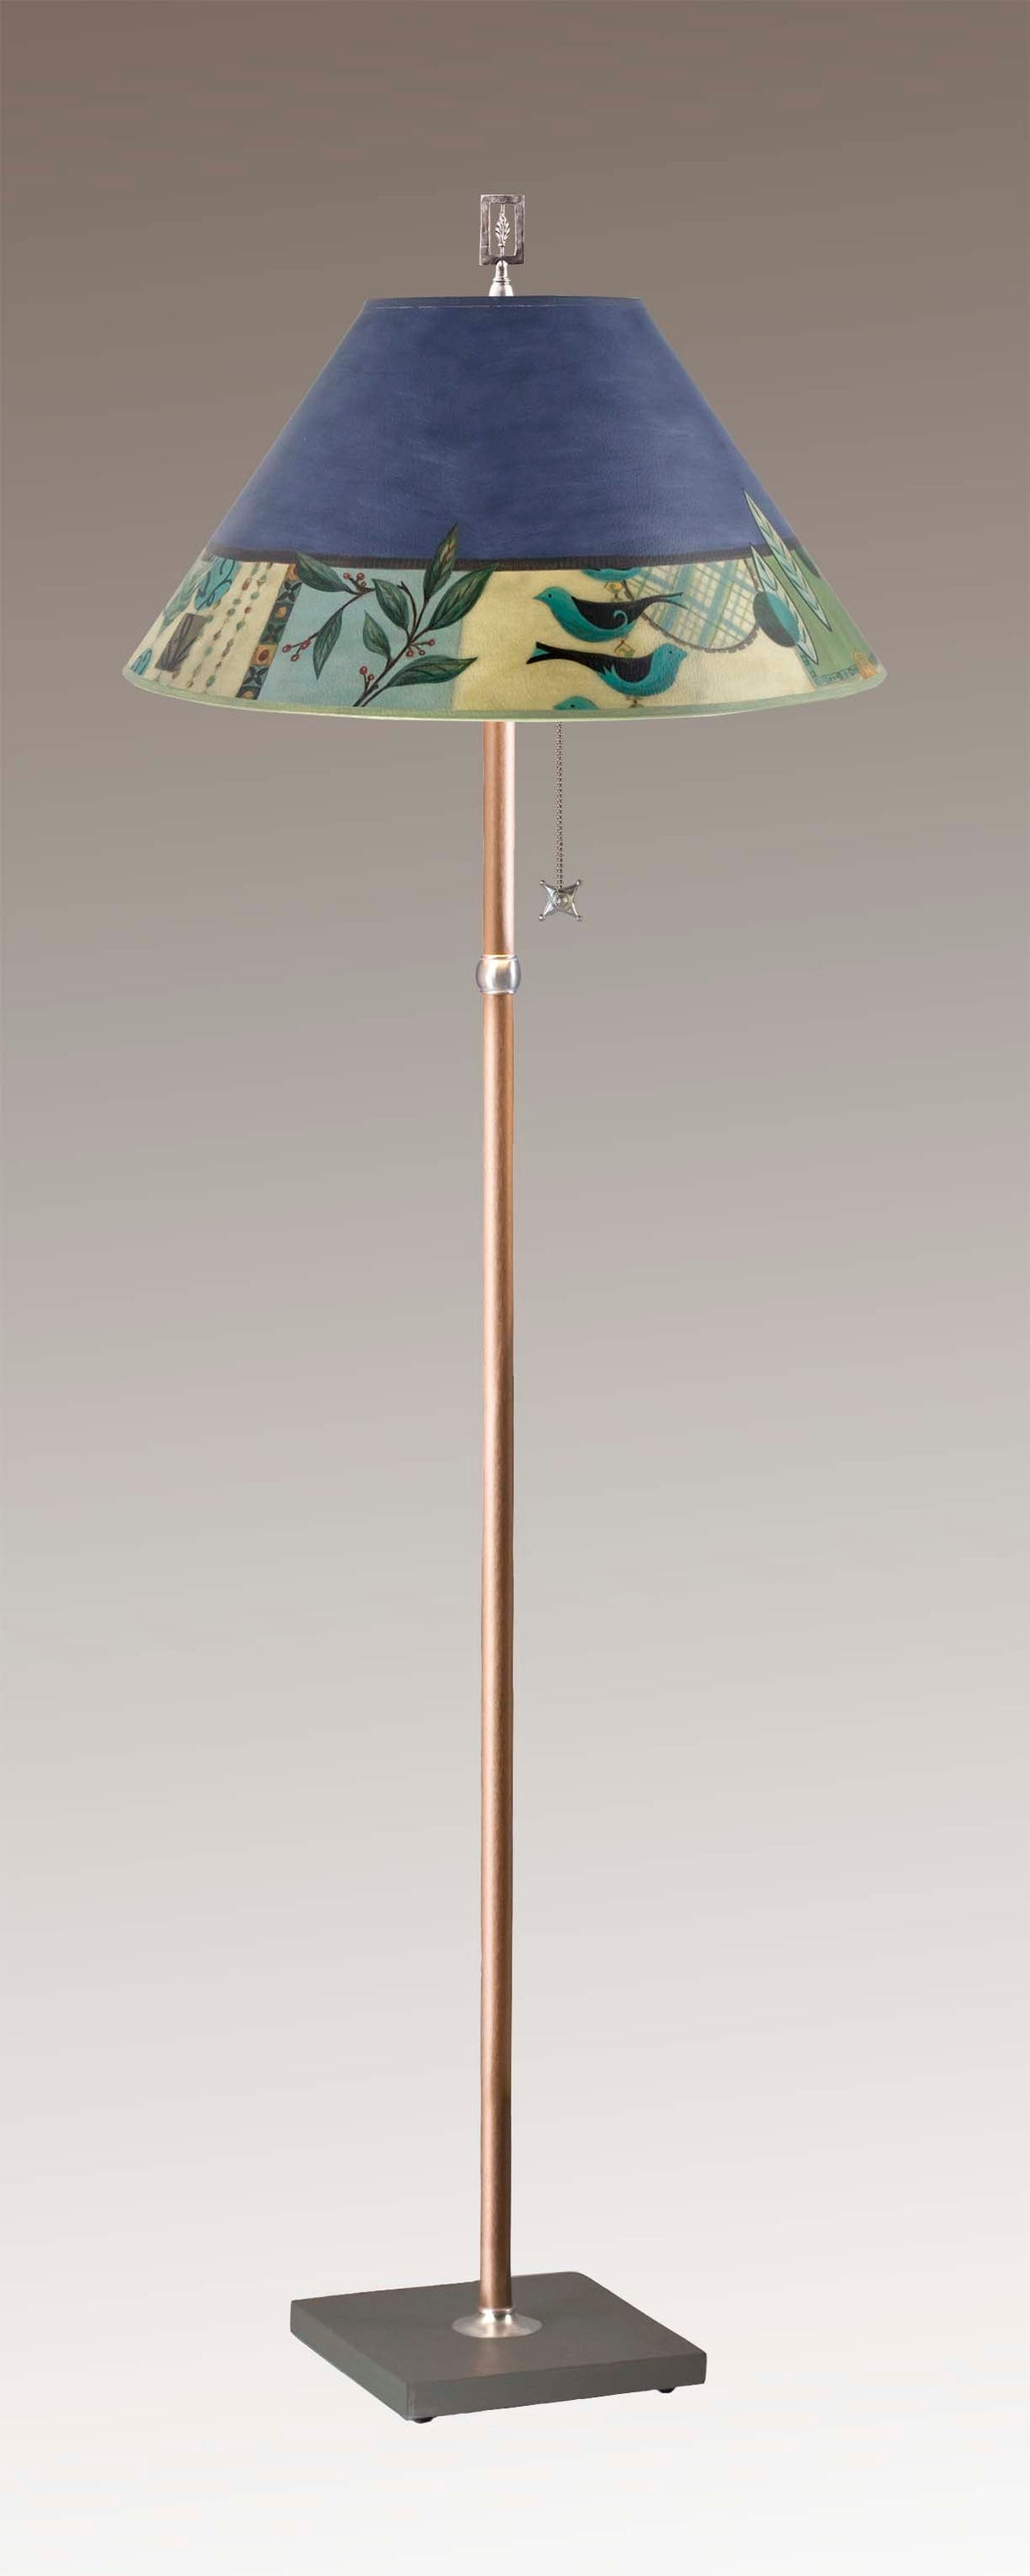 Copper Floor Lamp with Large Conical Shade in New Capri Periwinkle